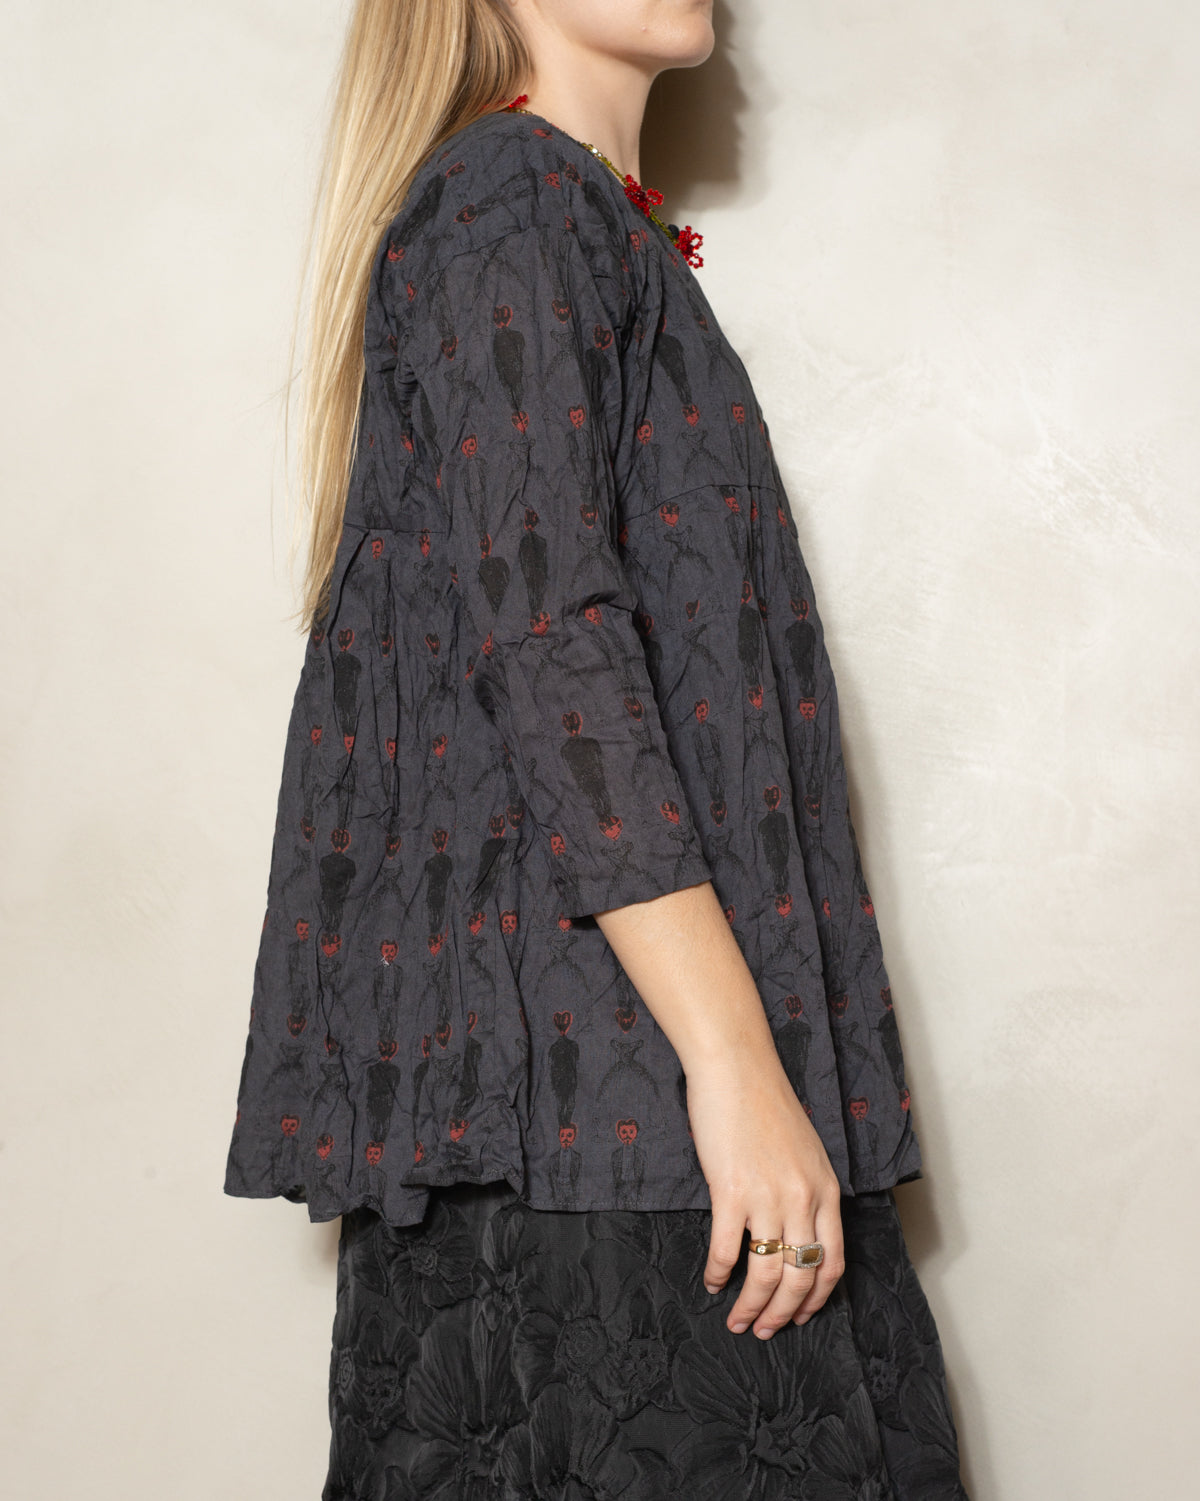 Charcoal Ceremony Print Blouse